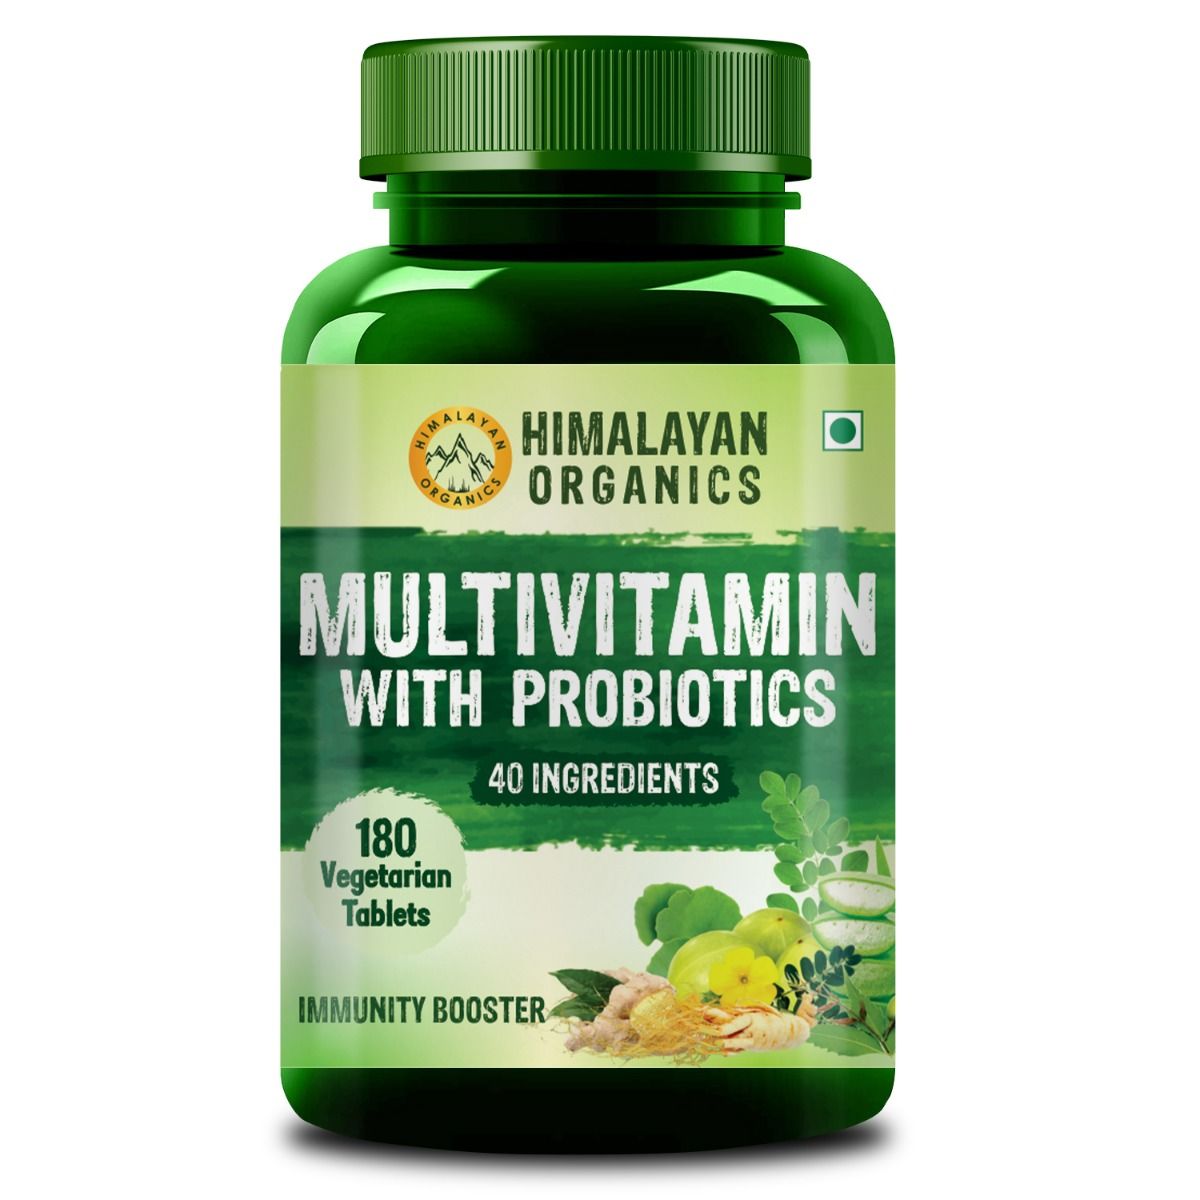 Himalayan Organics Multivitamin with Probiotics, 180 Tablets, Pack of 1 